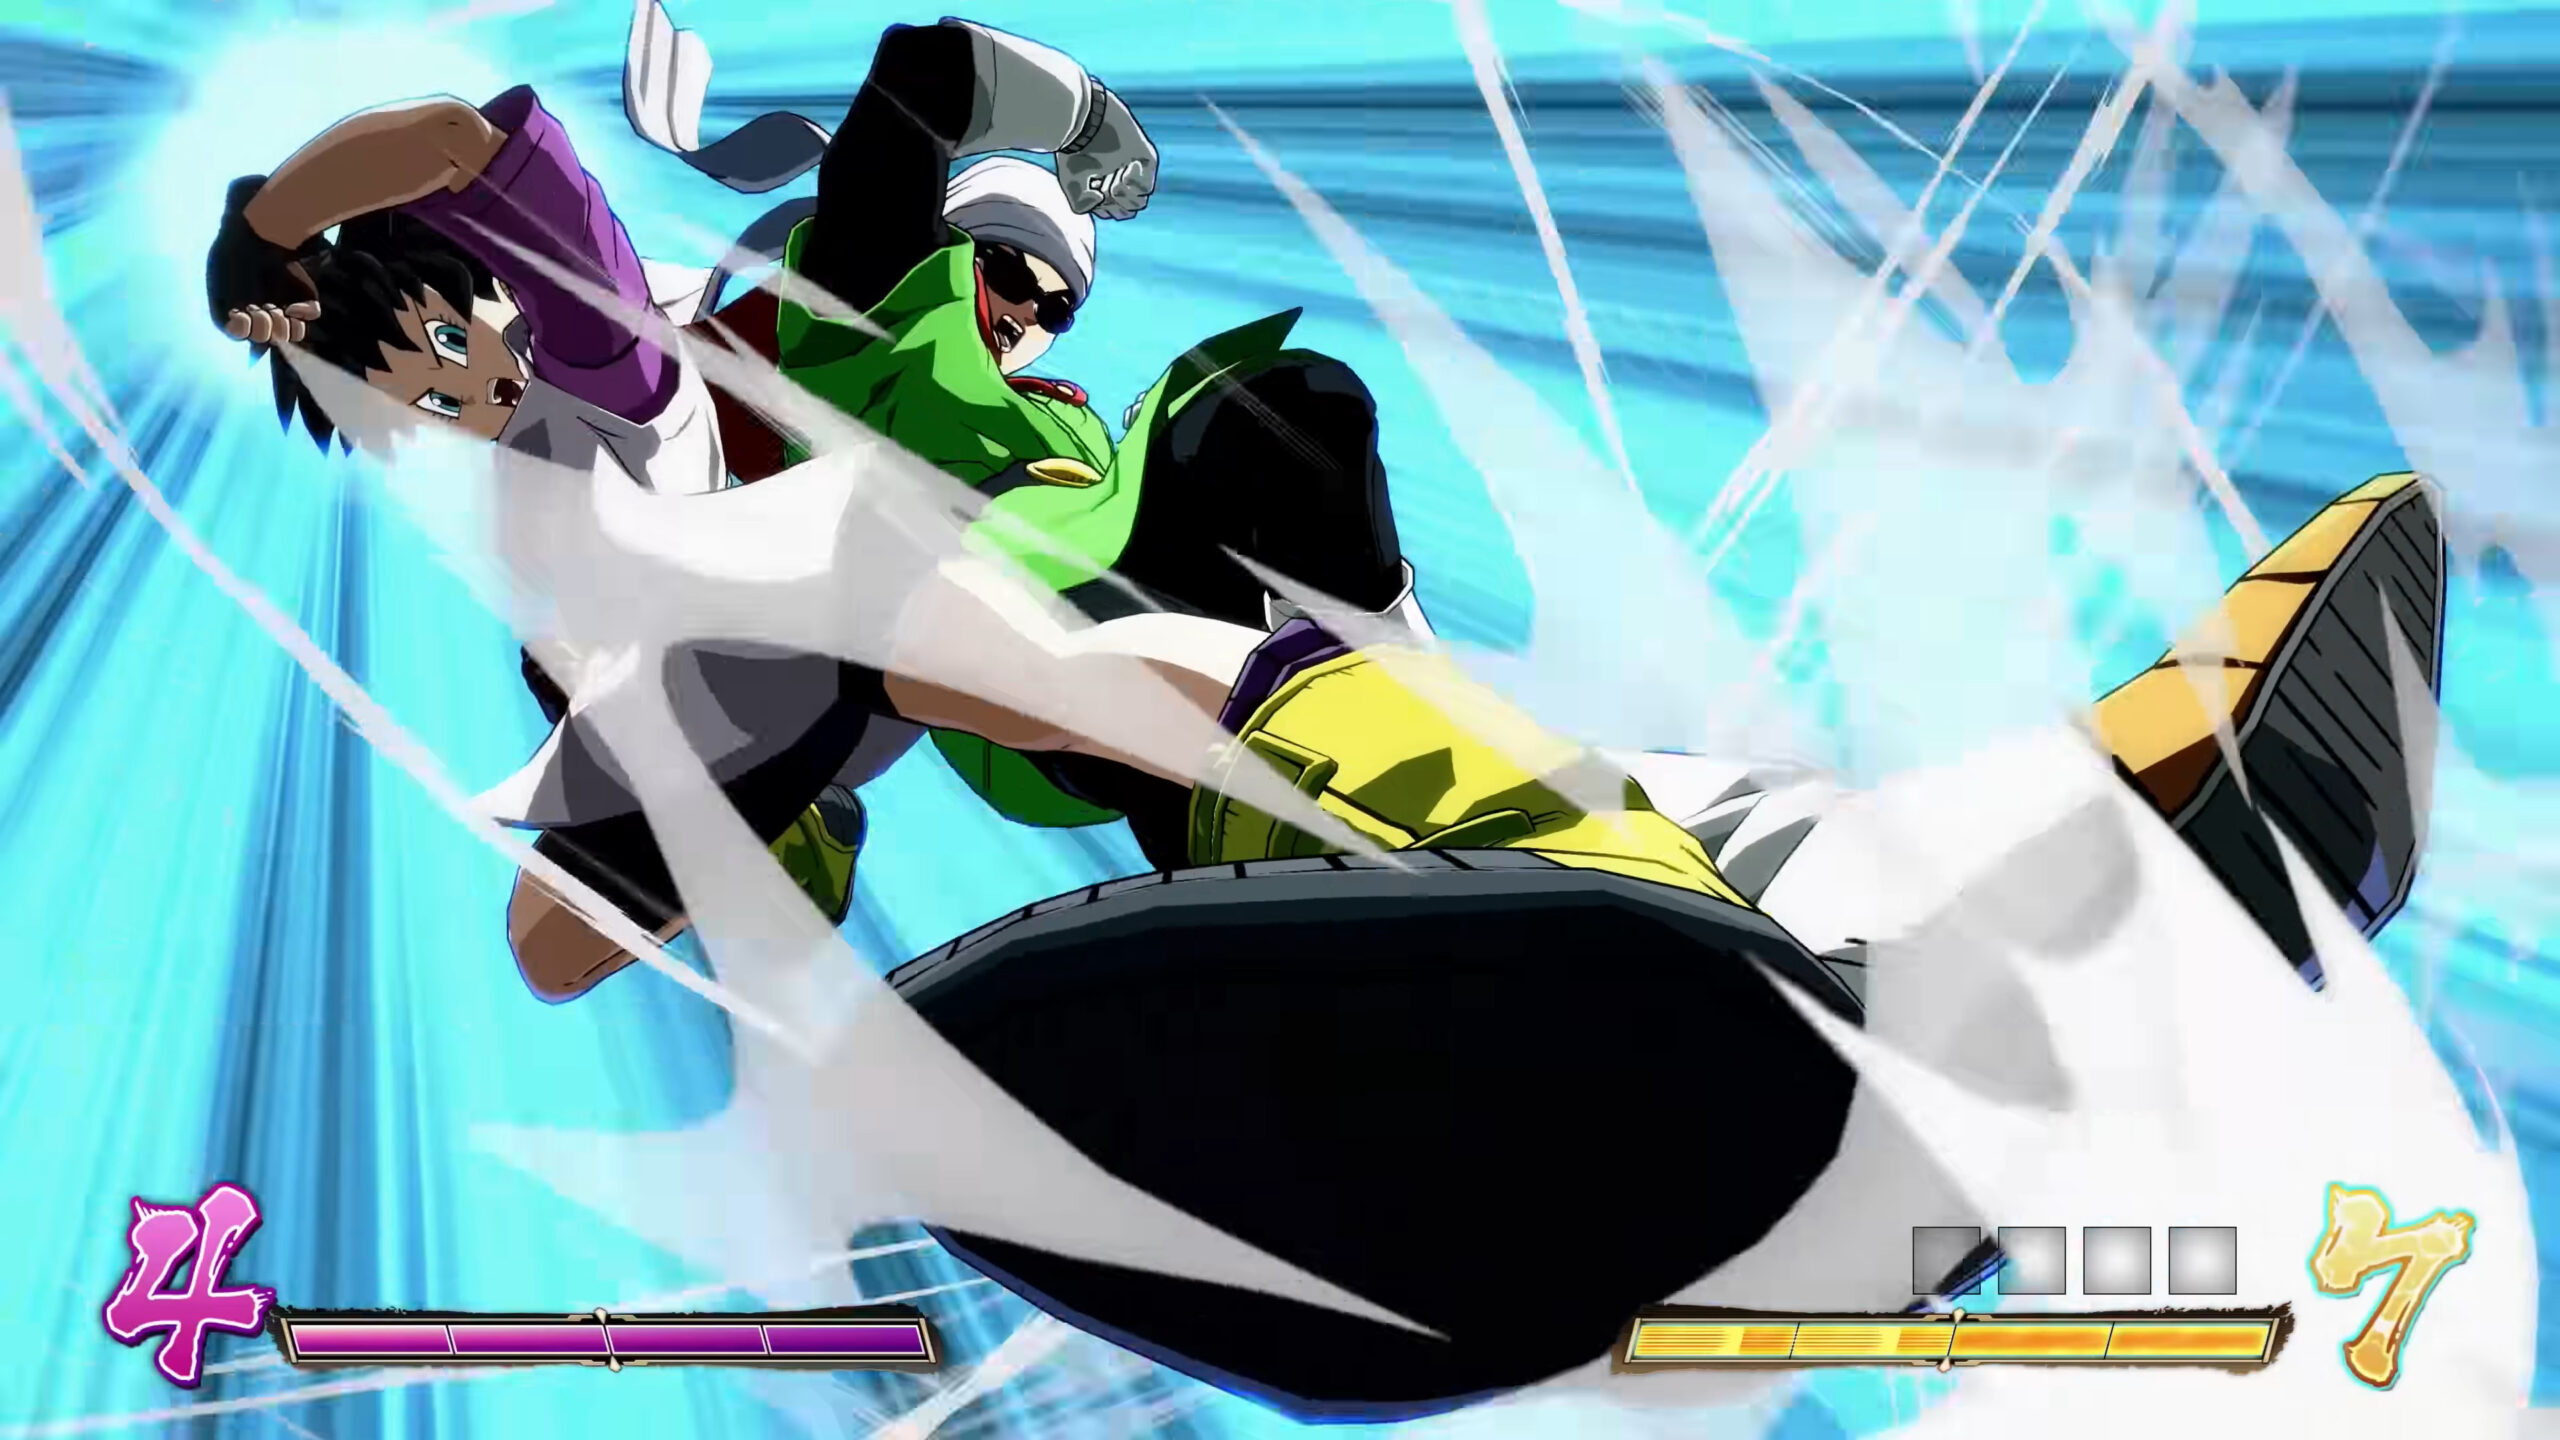 Videl (Yuko Minaguchi) and the Great Saiyaman (???) deliver justice in Dragon Ball FighterZ (2018), Arc System Works